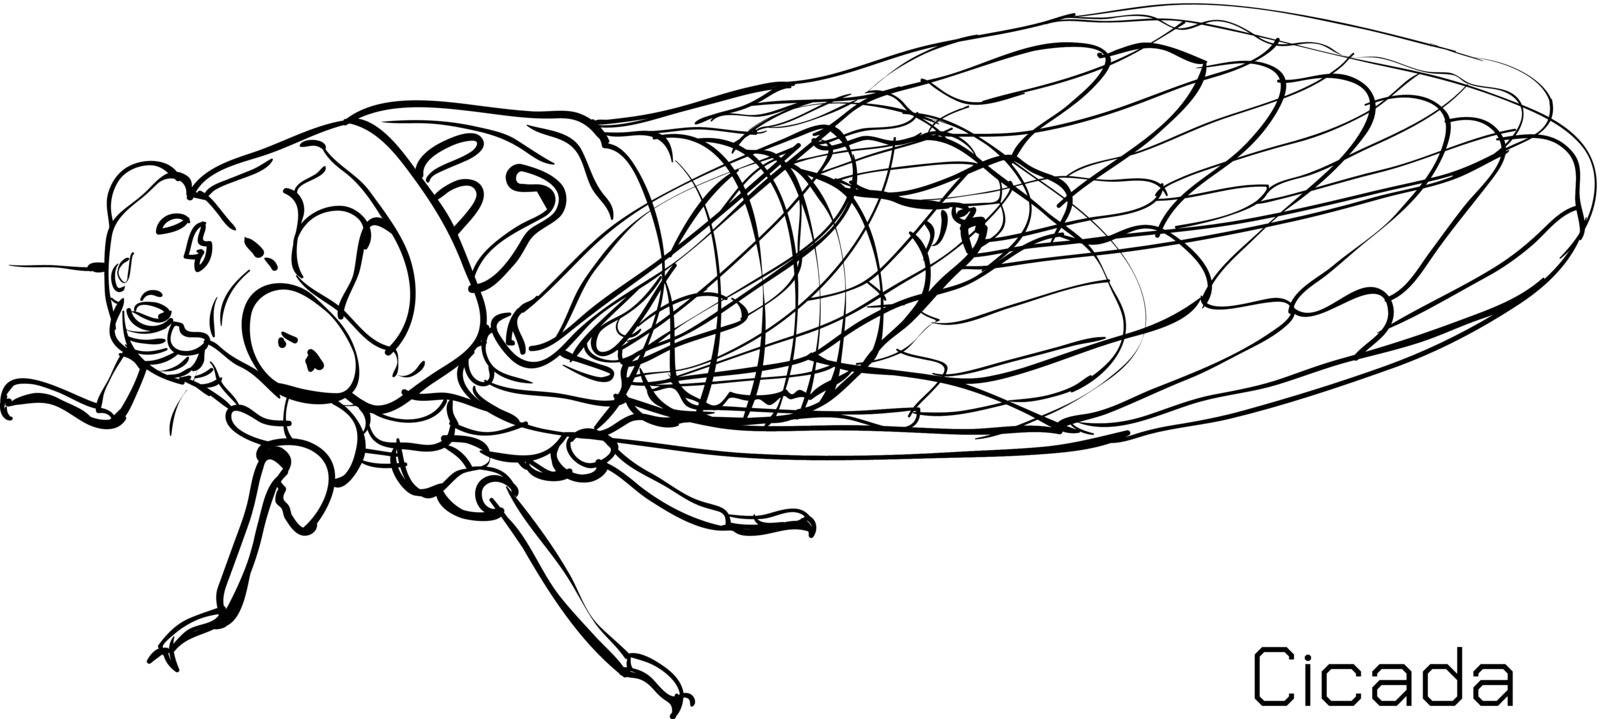 Drawing of cicada on white background.vector illustration